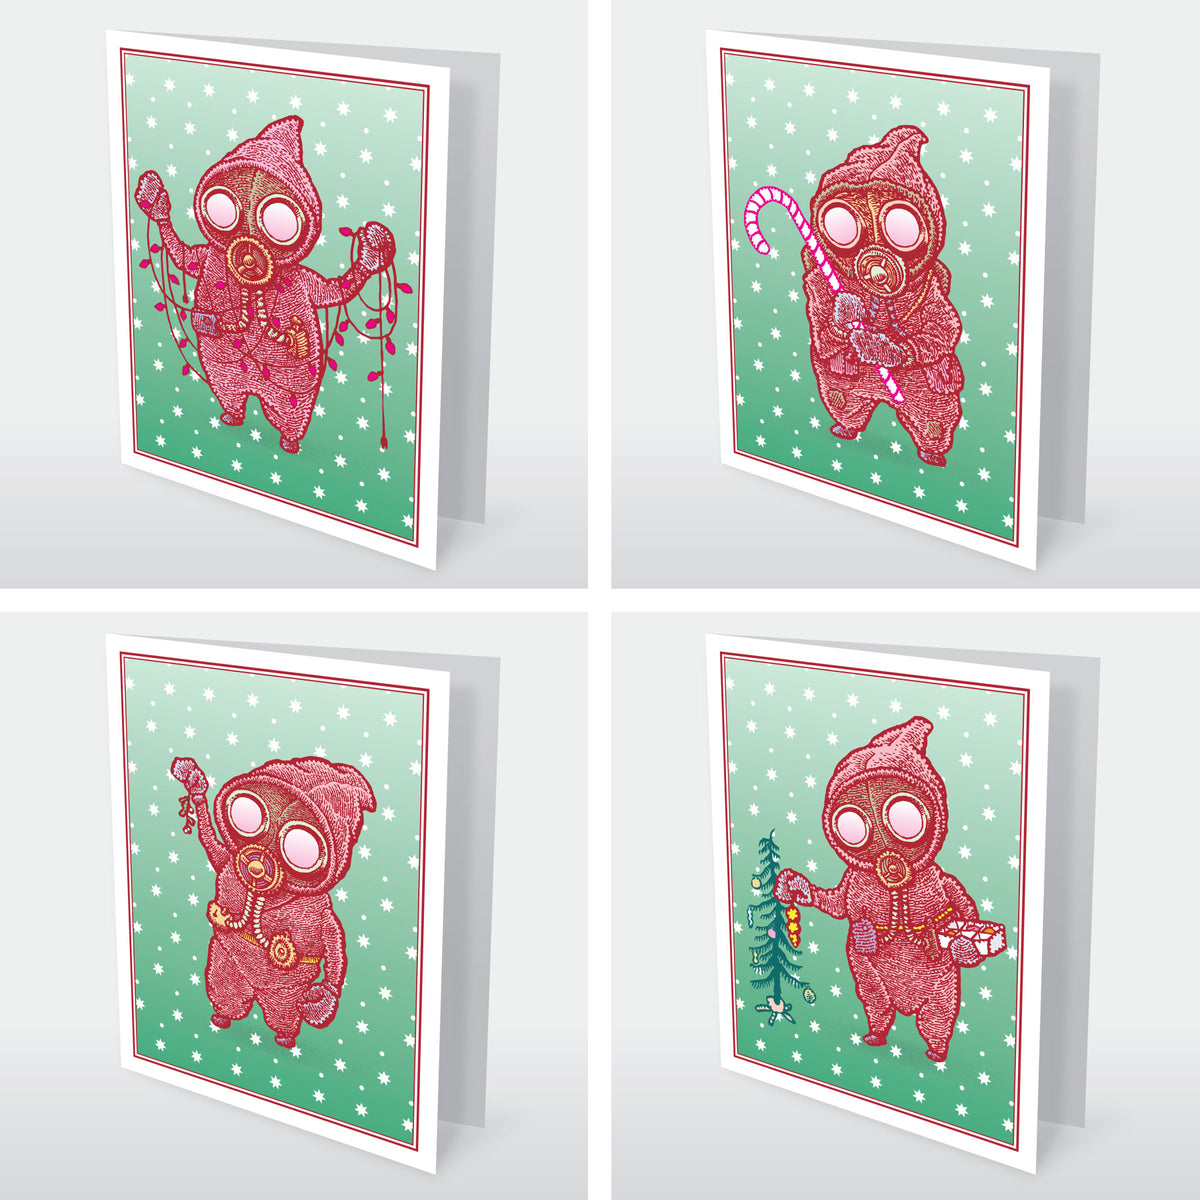 Infectious Holiday Spirit Greeting Cards (20-Pack)